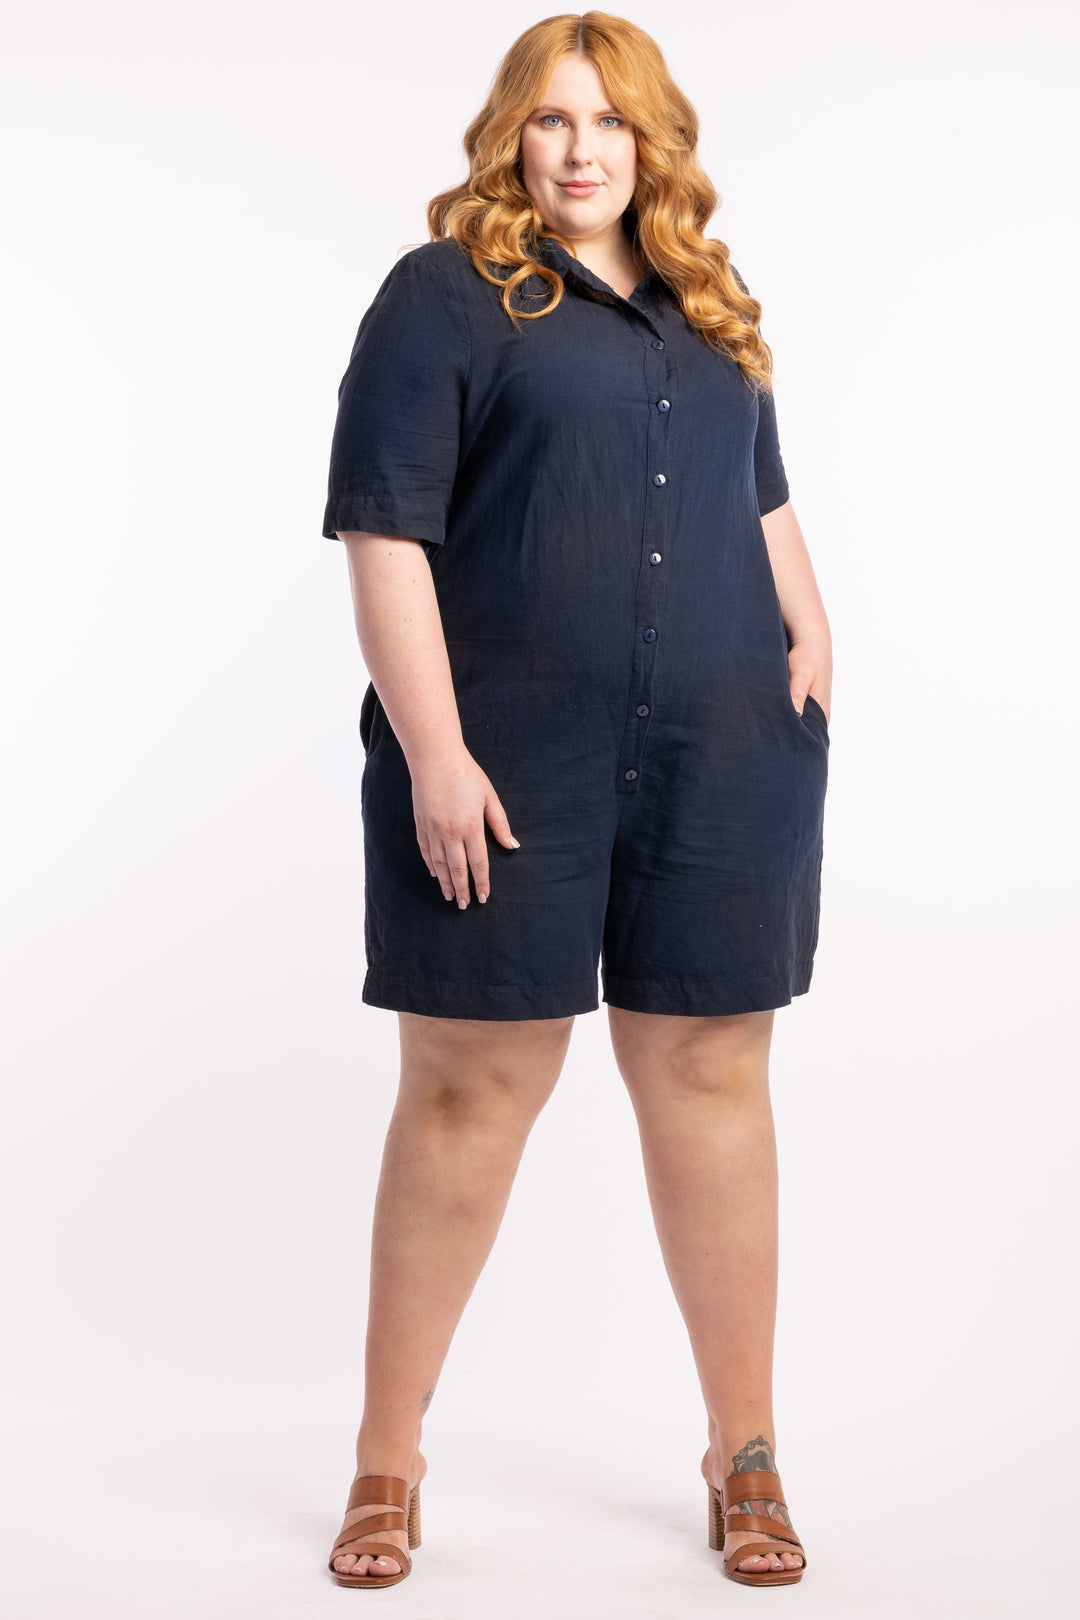 Jump For My Love Jumpsuit - Navy -  STOCK AVAILABLE - SIZE S (14/16)